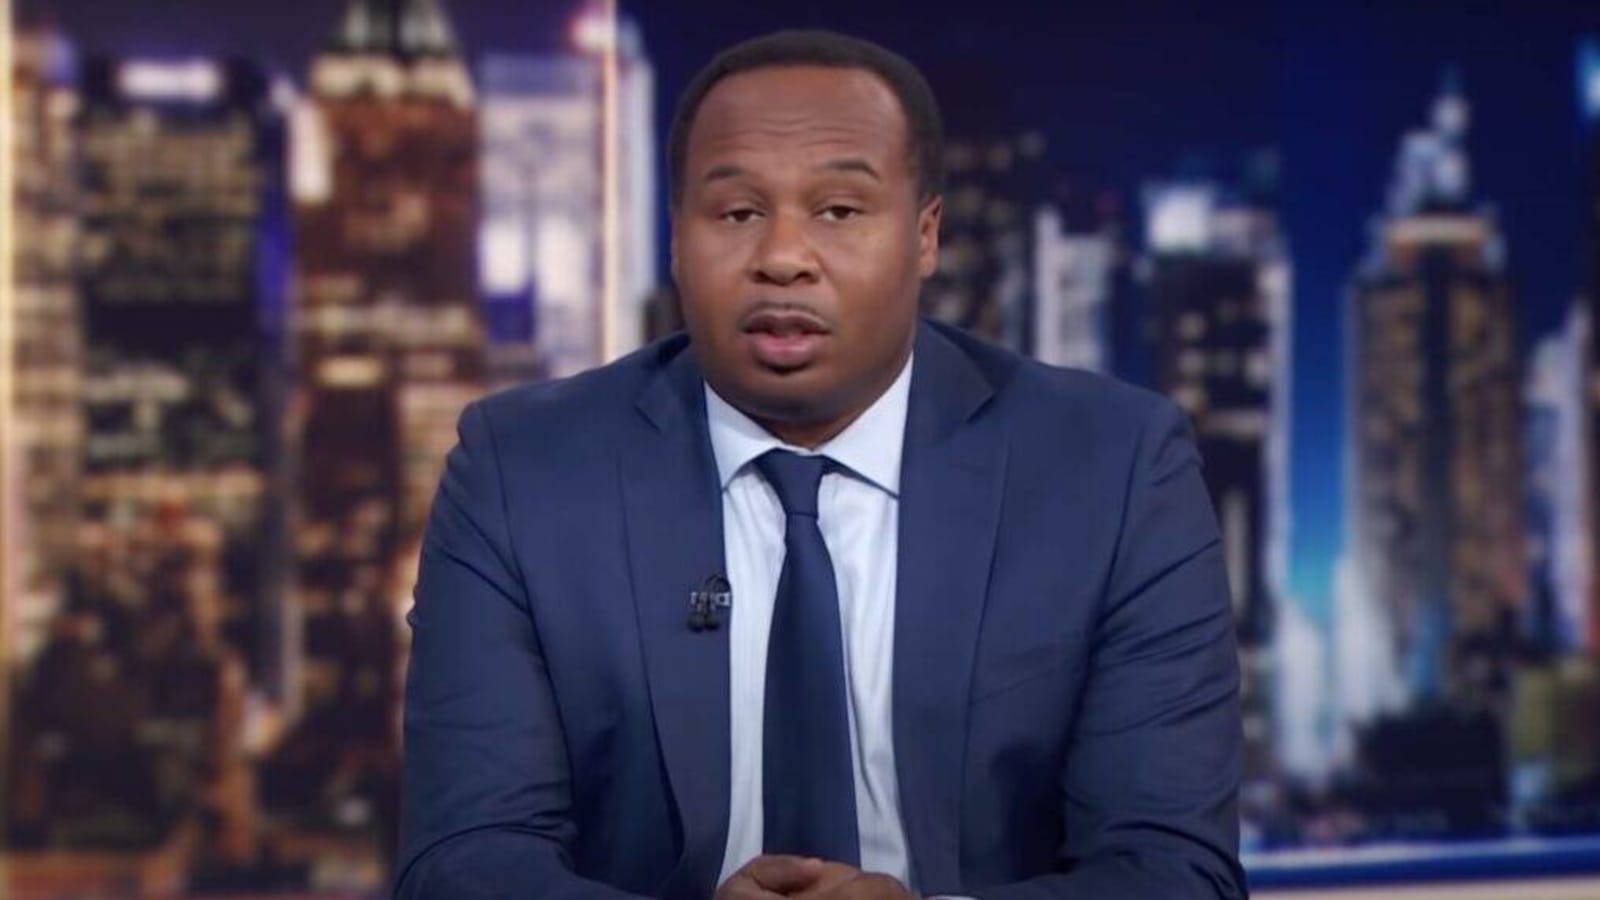 Roy Wood Jr. Quits ‘The Daily Show’ After 8 Years: He Explains Why